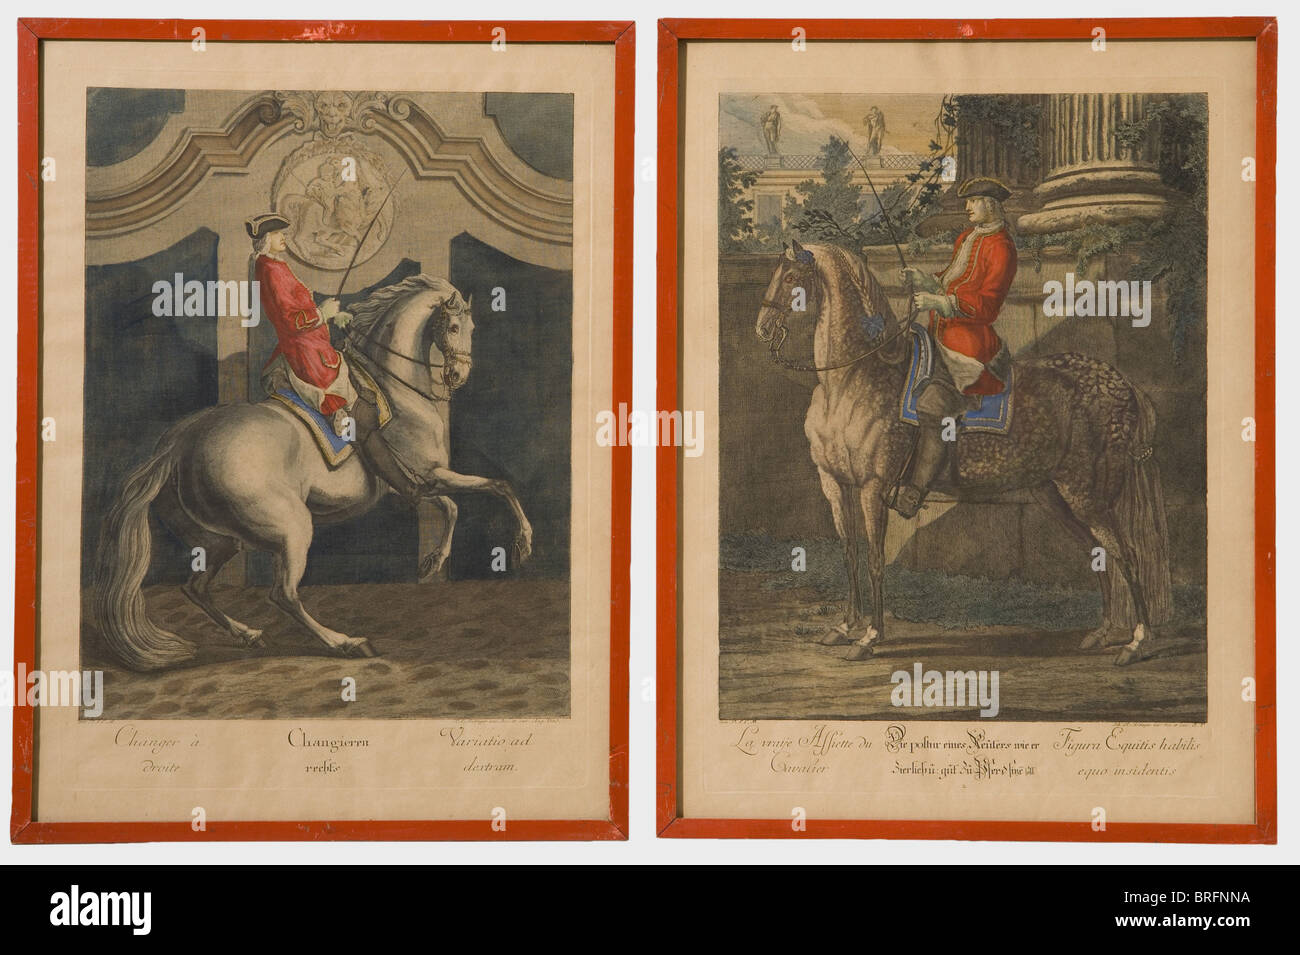 Johann Elias Ridinger (1698 - 1767) - six copper engravings, of dressage figures, handcoloured. Yellowed, partially with water and age stains. Size 46 x 62 cm. Ridinger was an Augsburg-based painter, illustrator, and art editor especially known for his works related to hunting or horse riding. fine arts, people, 18th century, weapons, arms, weapon, arm, fighting device, book, books, clipping, cut out, cut-out, cut-outs, man, men, male, Artist's Copyright has not to be cleared Stock Photo